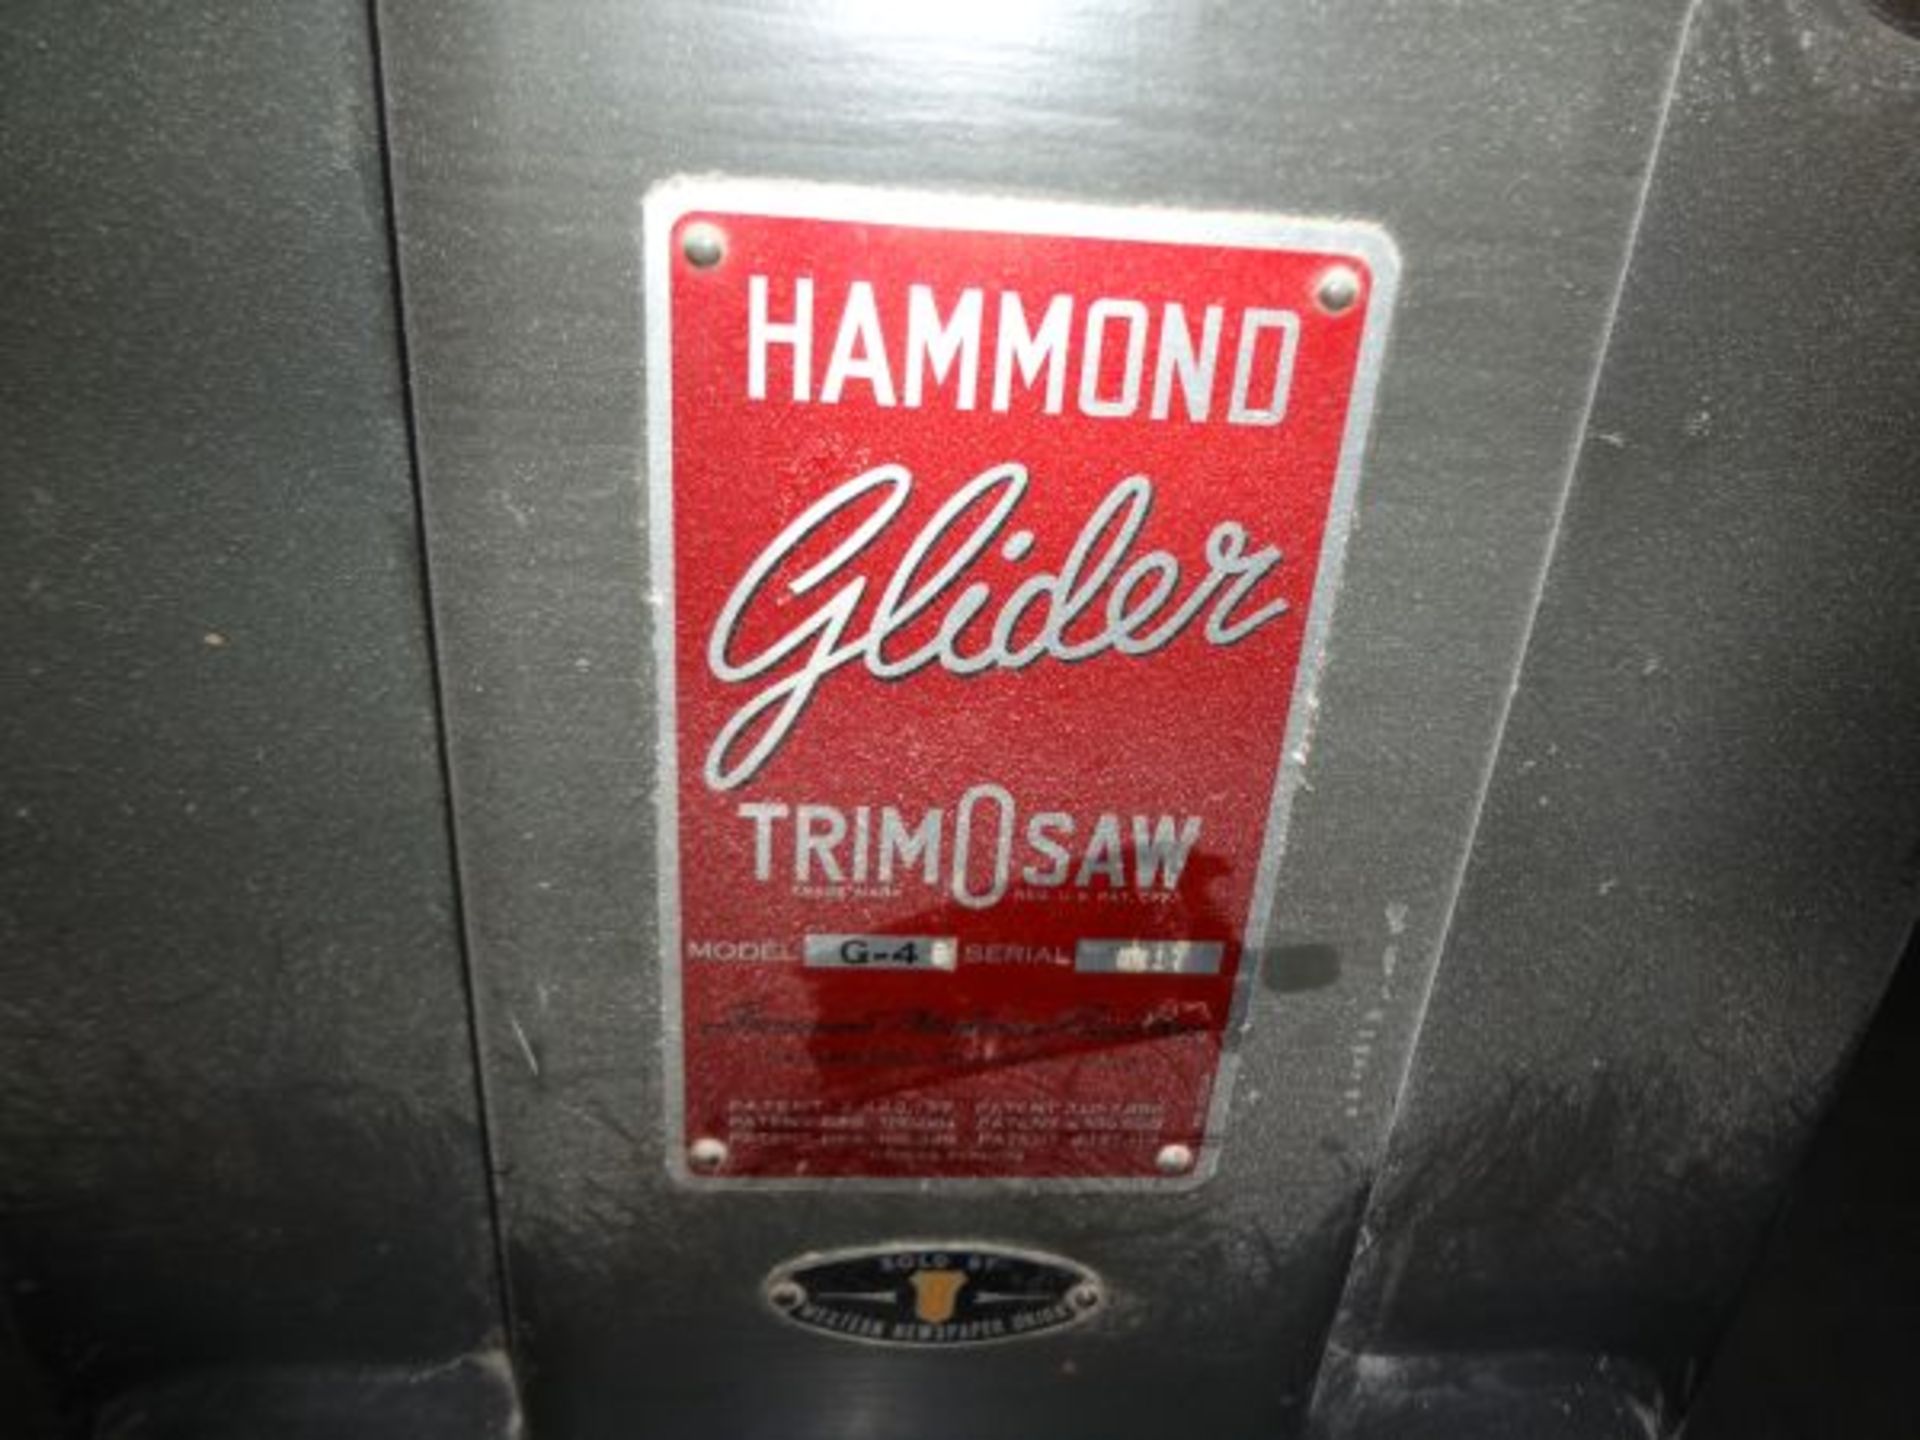 6" HAMMOND MODEL G-4 GLIDER TRIMOSAW TABLE SAW; S/N 5217 - Image 2 of 3